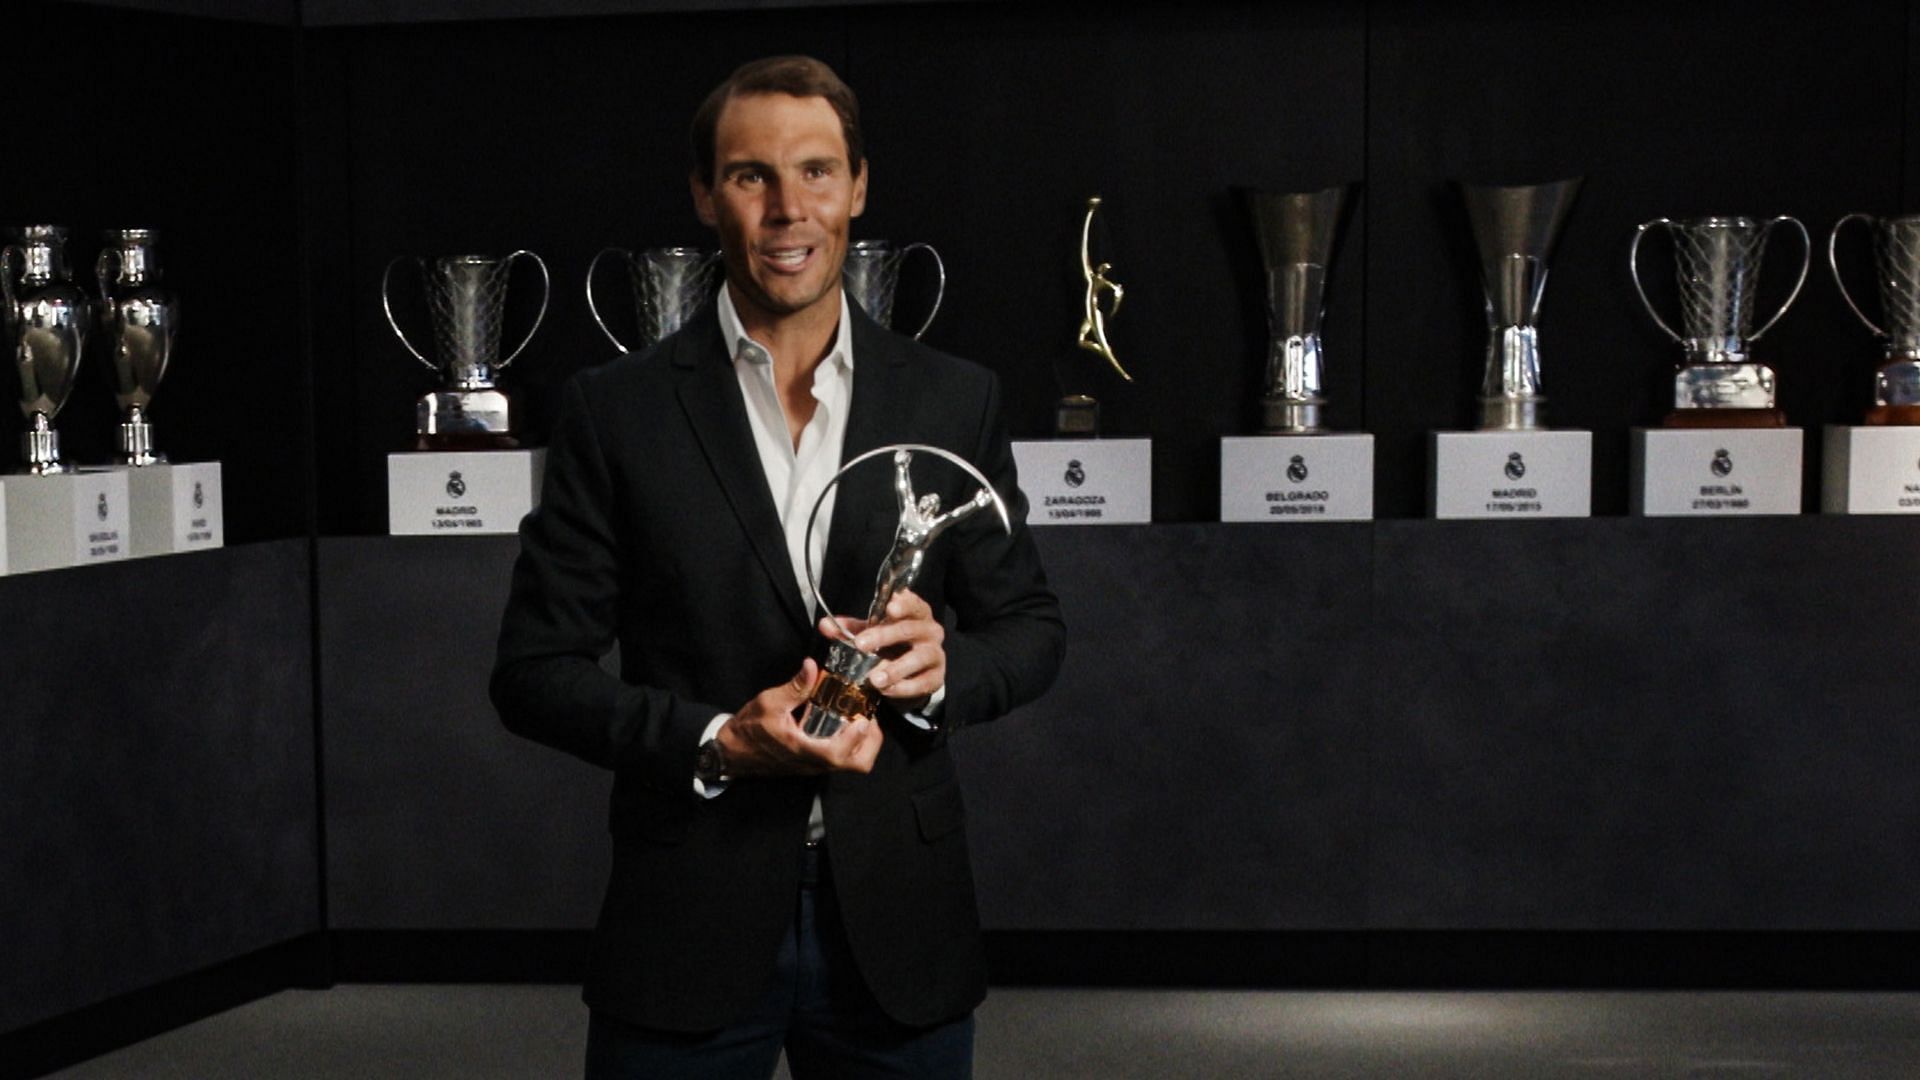 Rafael Nadal adds another accolade to his 2022 campaign